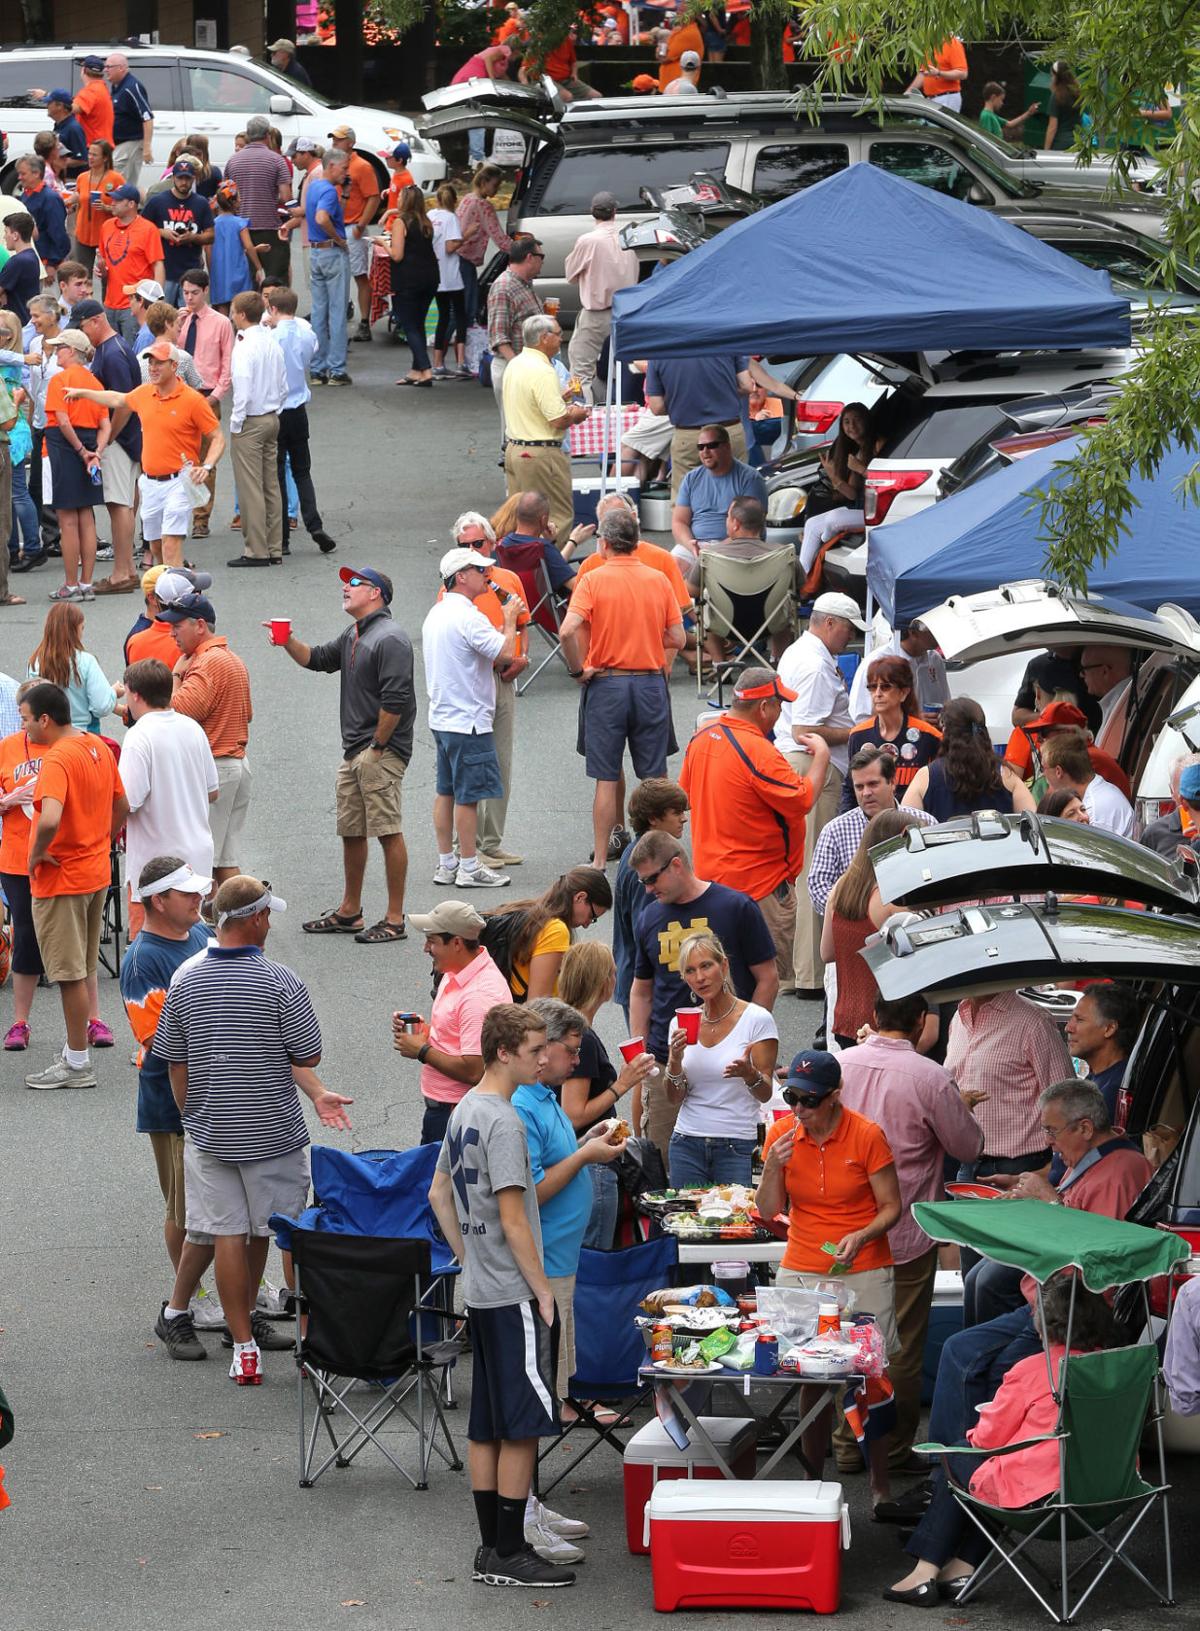 Family football tailgating guide for Richmond & beyond | Food & Drink